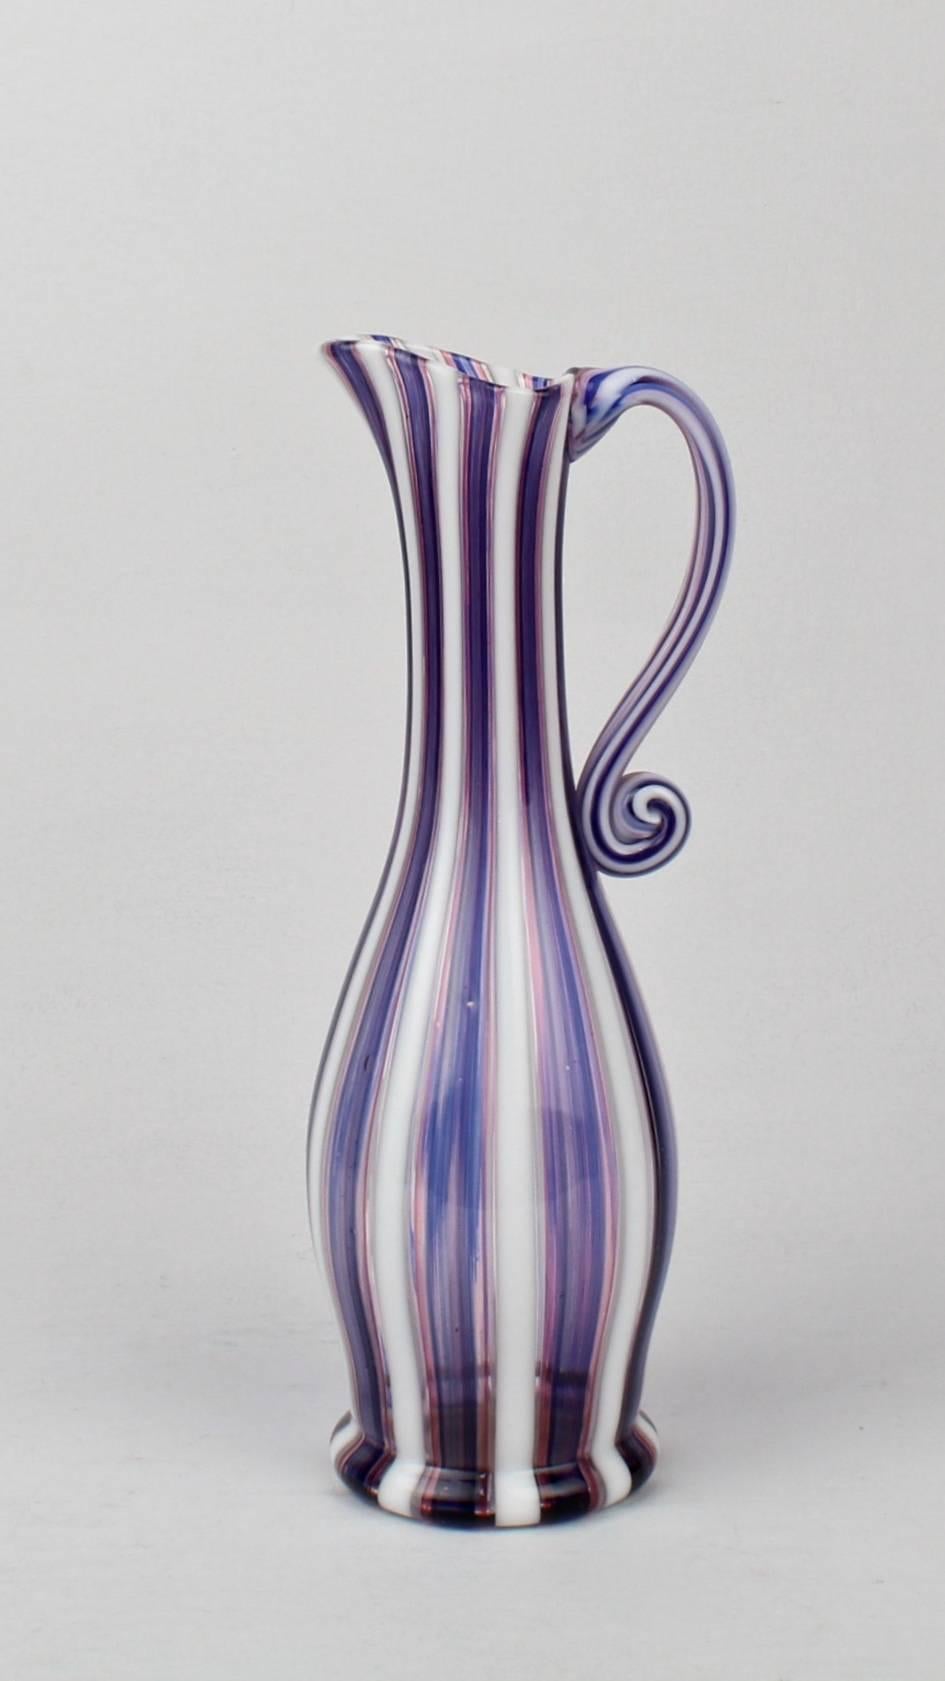 A fine Venetian pink (or red), white and blue a canne glass ewer or pitcher.

Likely by Salviati. 

With an applied, S scroll handle of the same canes.

Height: ca. 10 1/8 in.

Items purchased from David Sterner Antiques must delight you.